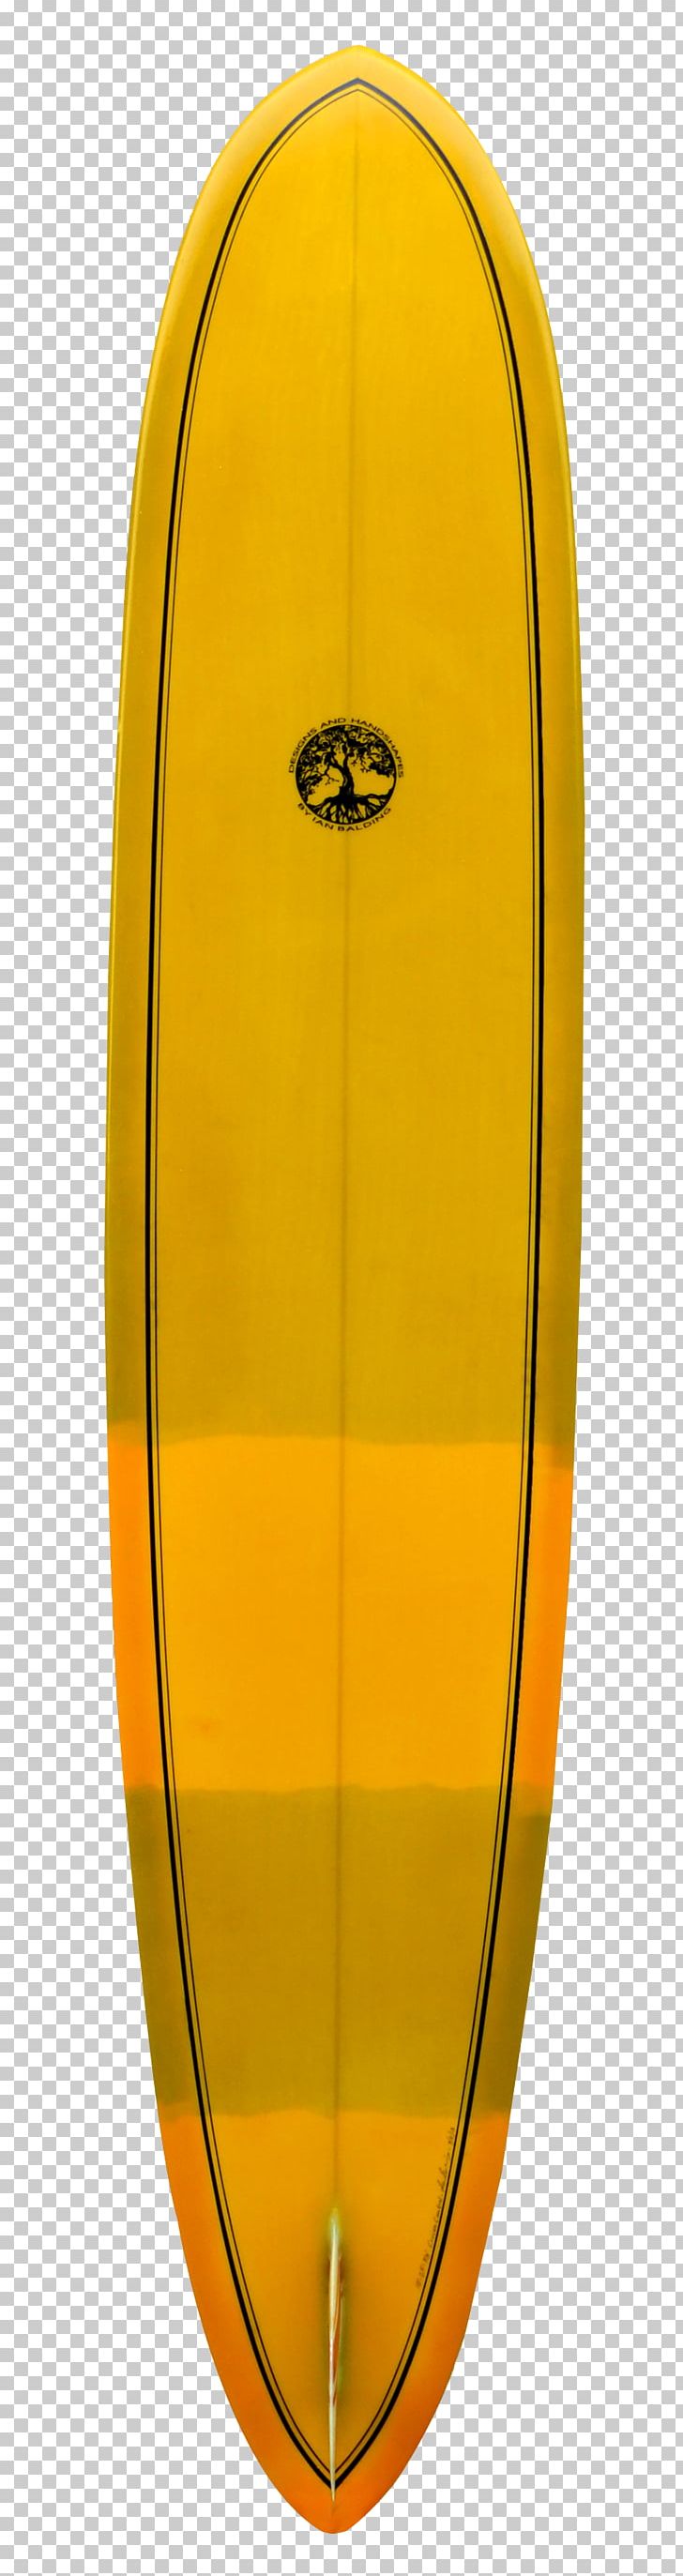 Surfboard Longboard Paddleboarding Surfing Ian Balding Paddle & Surf PNG, Clipart, Aesthetics, Control, Cruise, Cruise Ship, Custom Free PNG Download